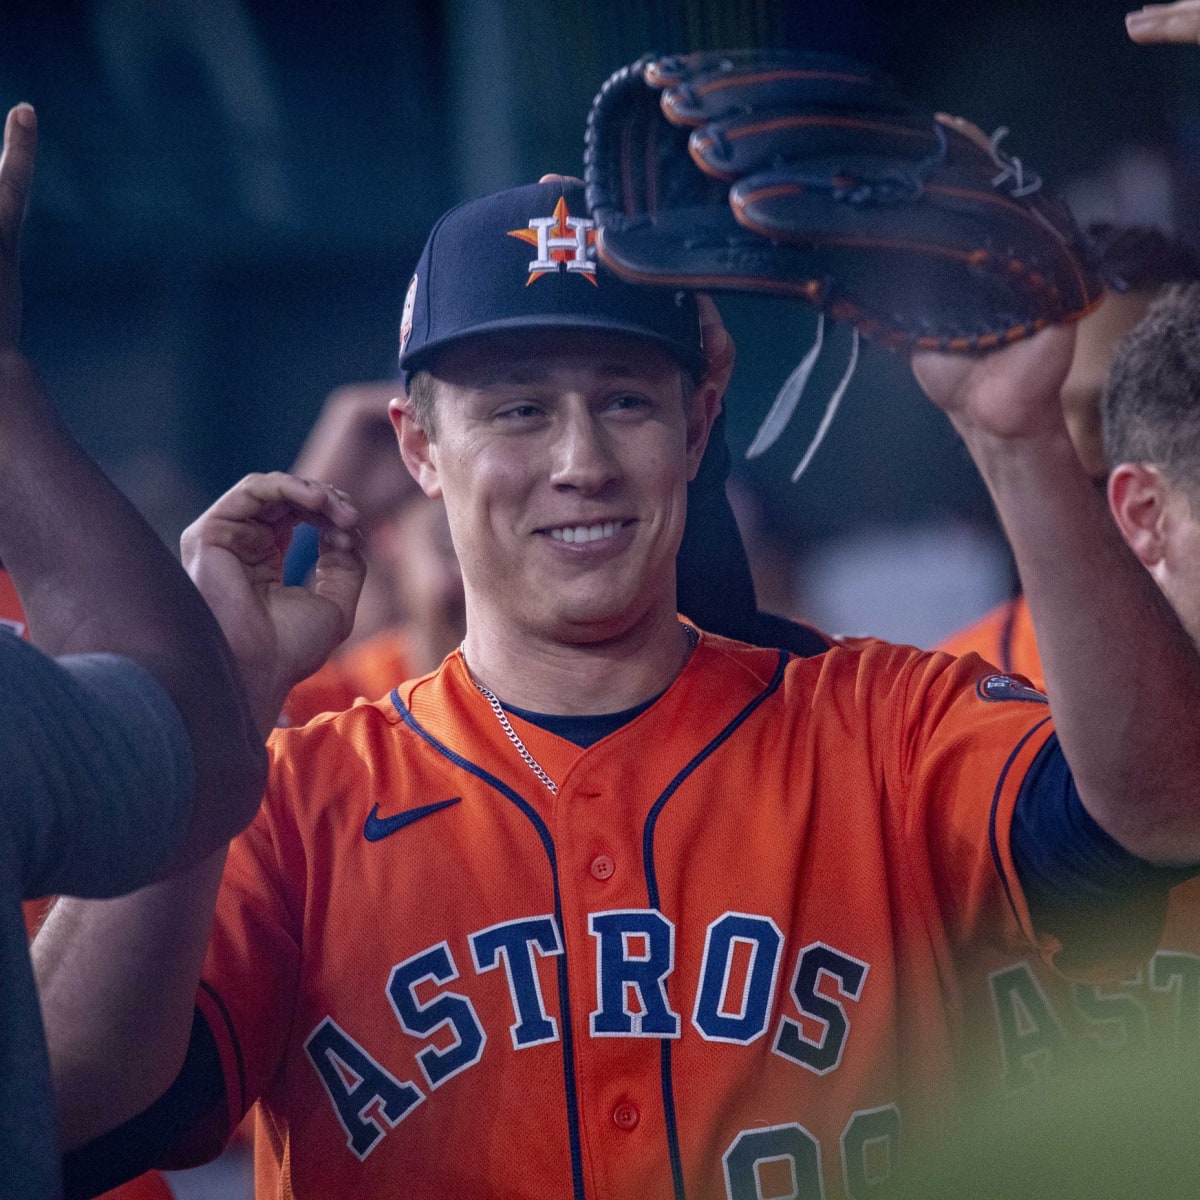 Astros become 1st team in MLB history to throw 2 immaculate